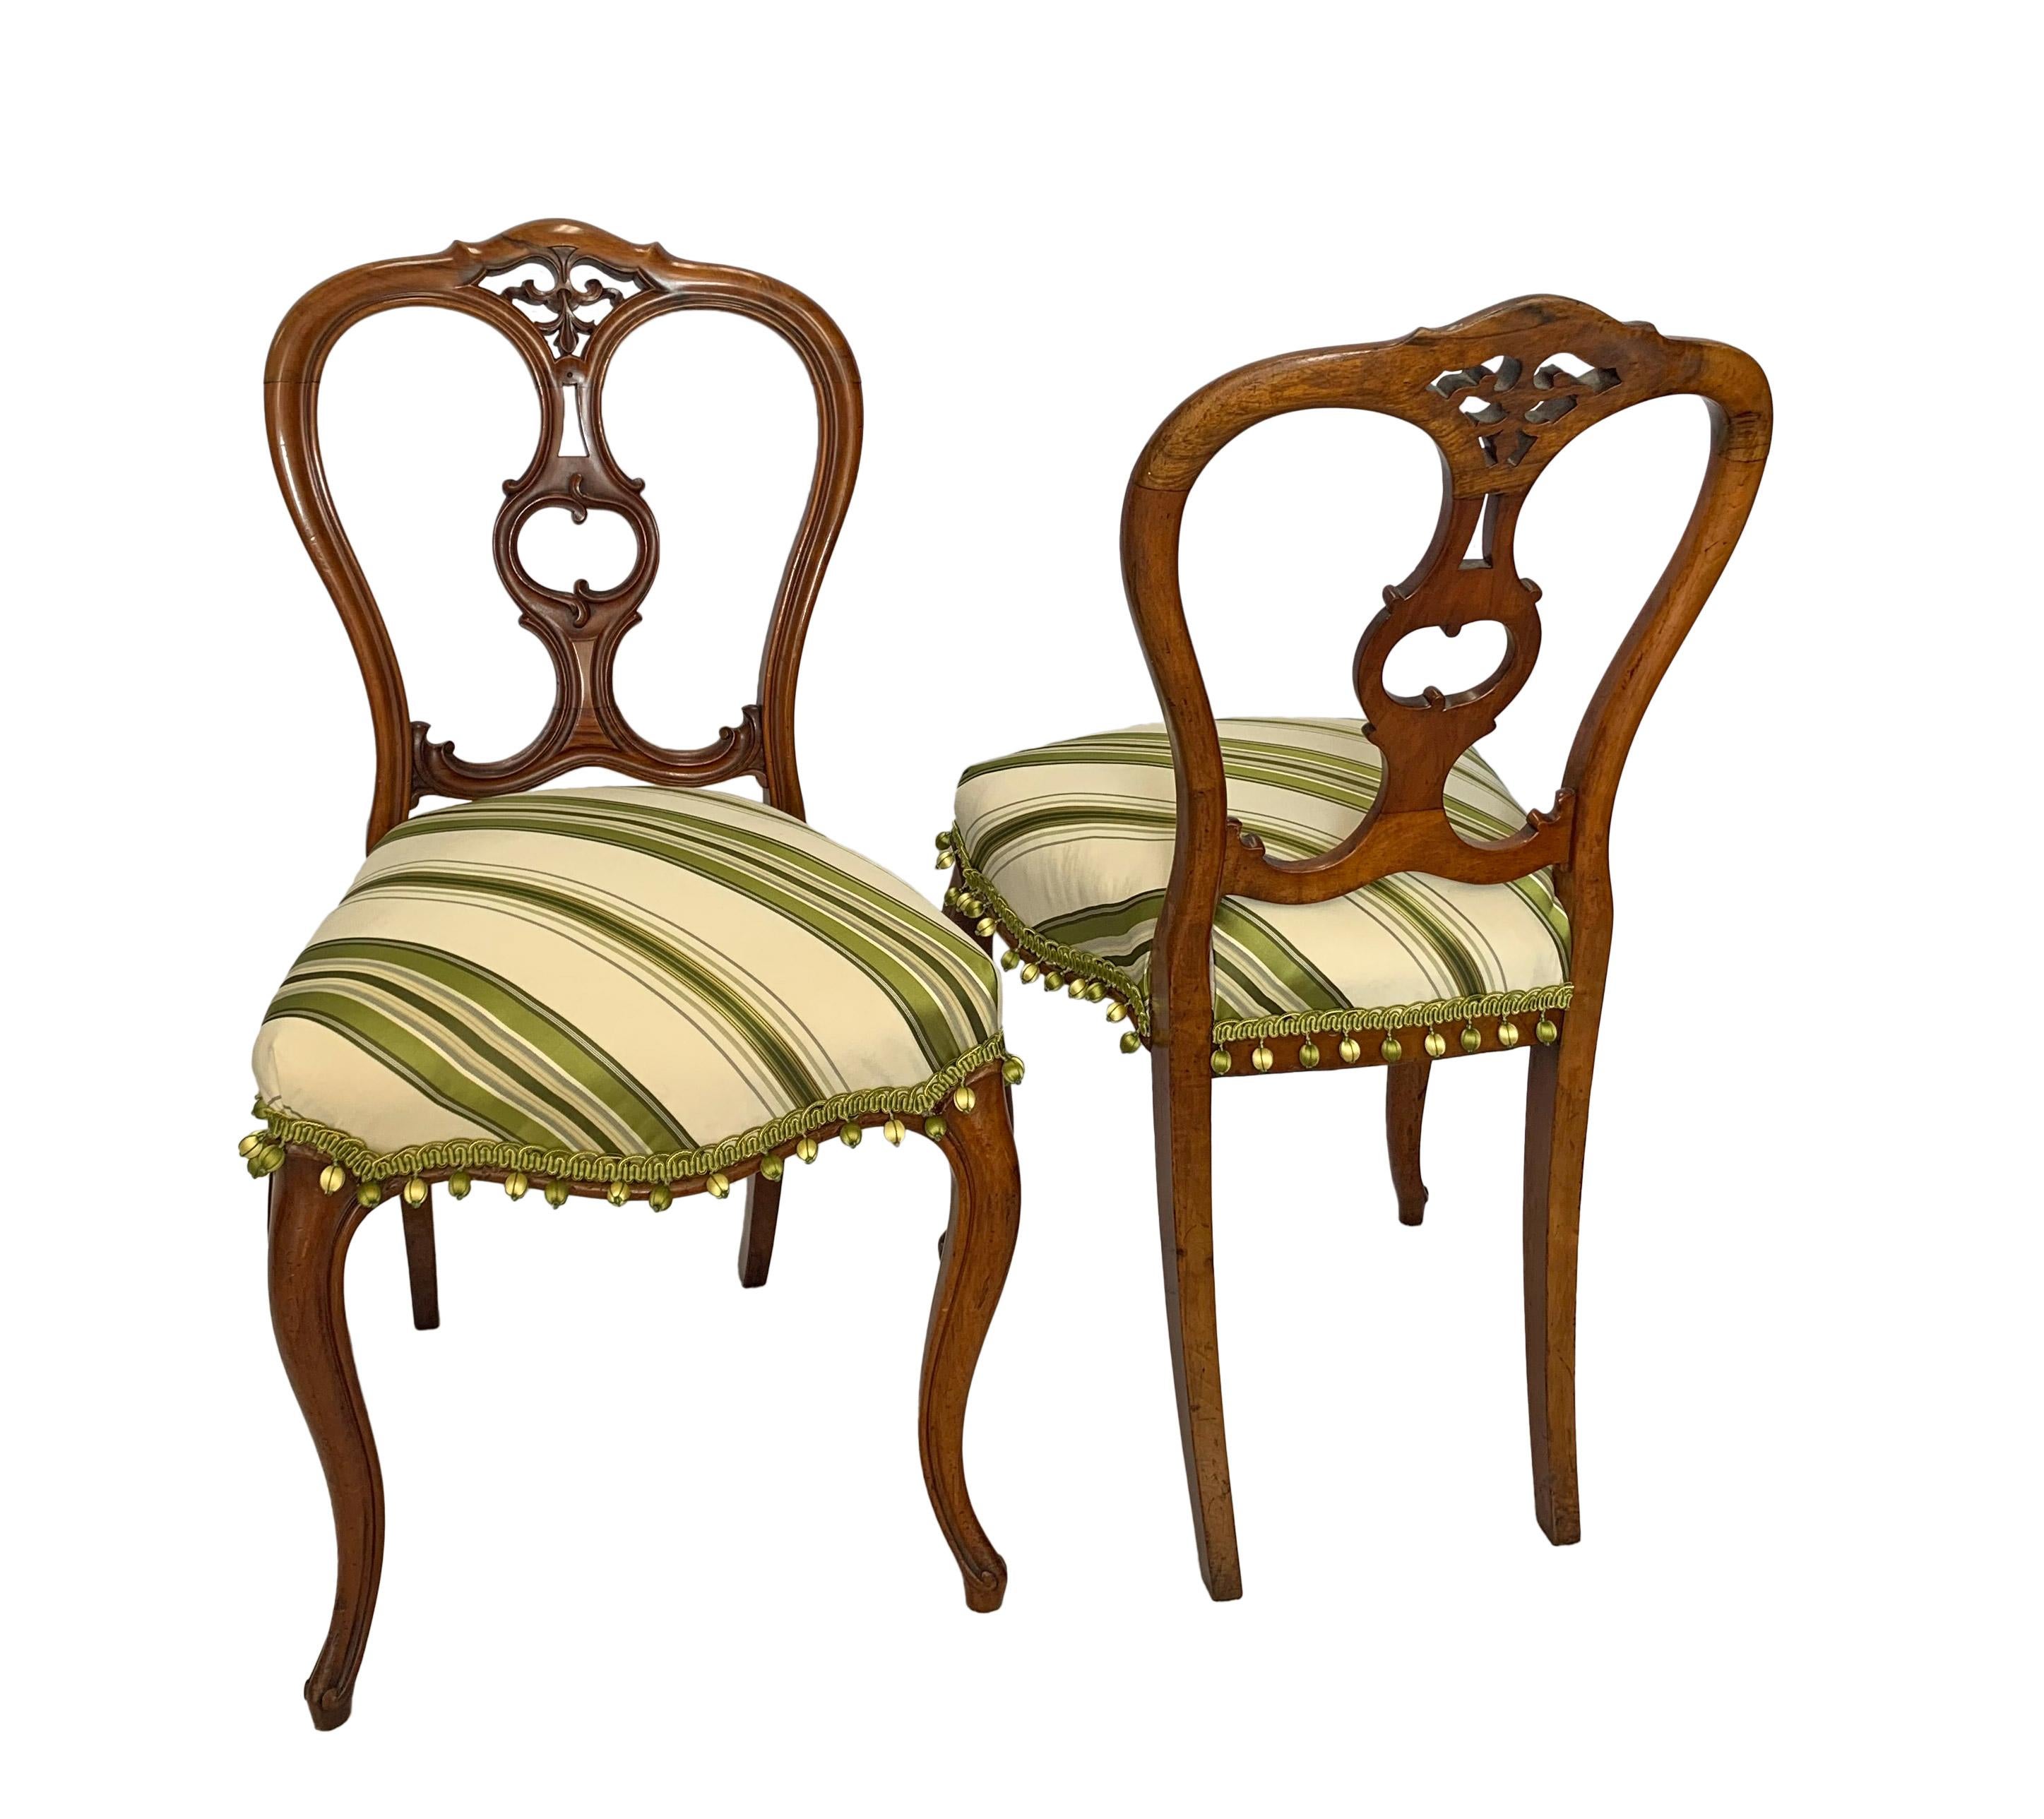 Early 20th Century Petite Victorian Style Elegantly Sculpted Balloon Back Chairs In Good Condition For Sale In San Antonio, TX